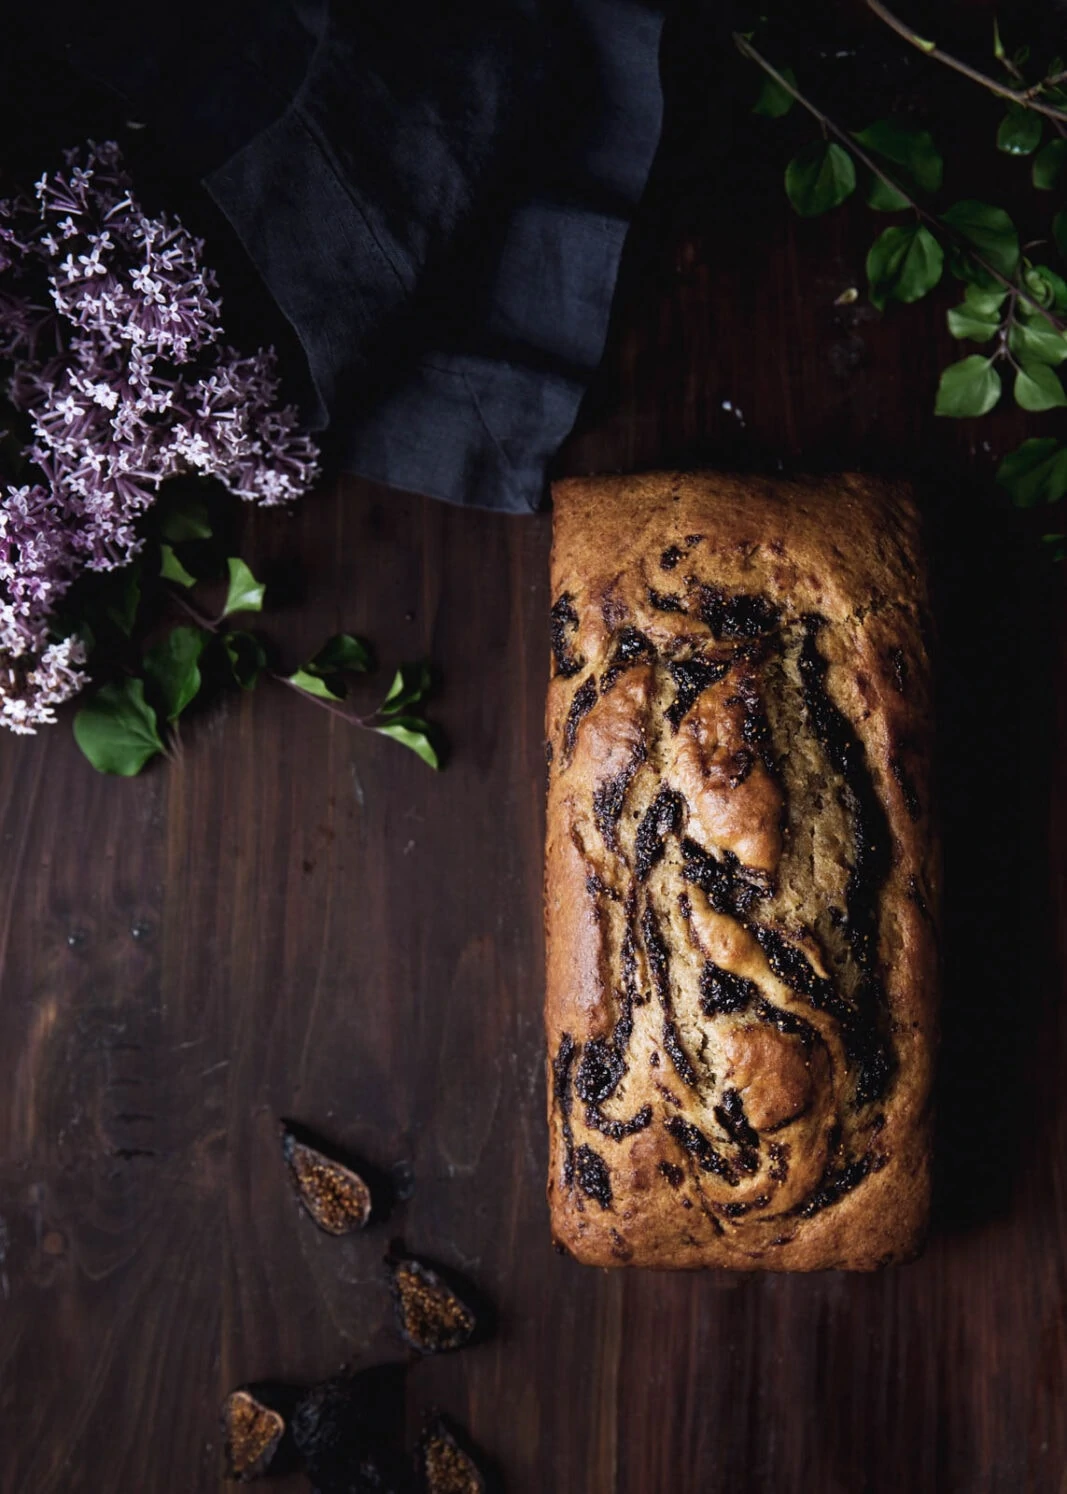 A nutty brown butter banana bread swirled with bourbon-soaked figs. Hello, gorgeous.